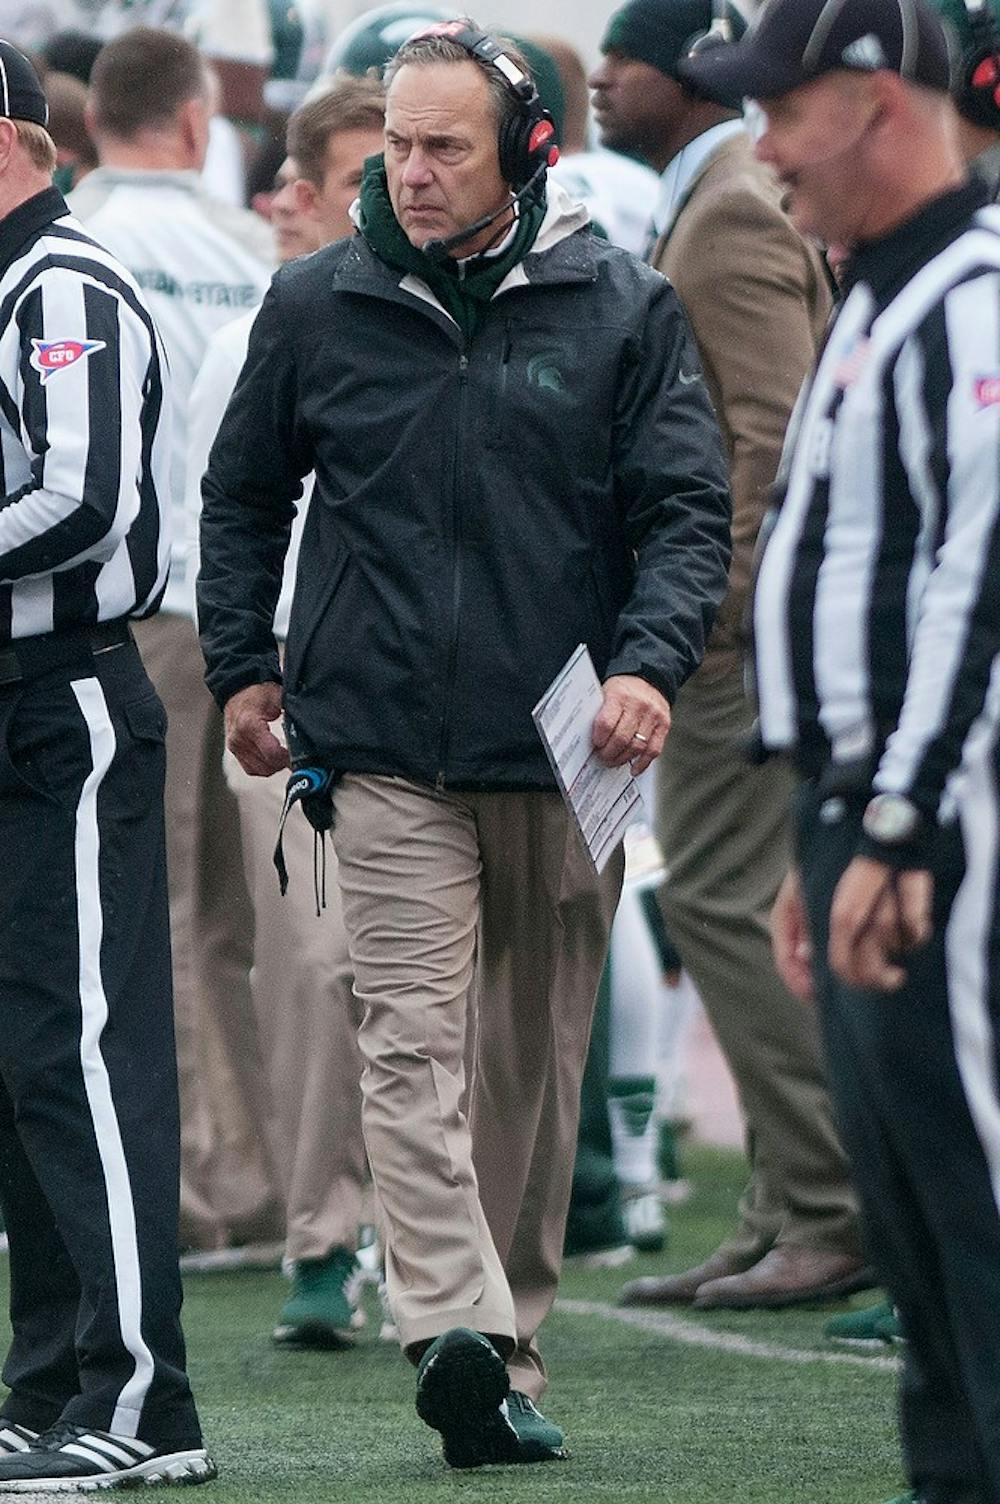 <p>Head coach Mark Dantonio reacts to a touchdown by Indiana during the game against Indiana on Oct. 18, 2014, at Memorial Stadium in Bloomington, Ind. The Spartans defeated the Hoosiers, 56-17. Jessalyn Tamez/The State News</p>